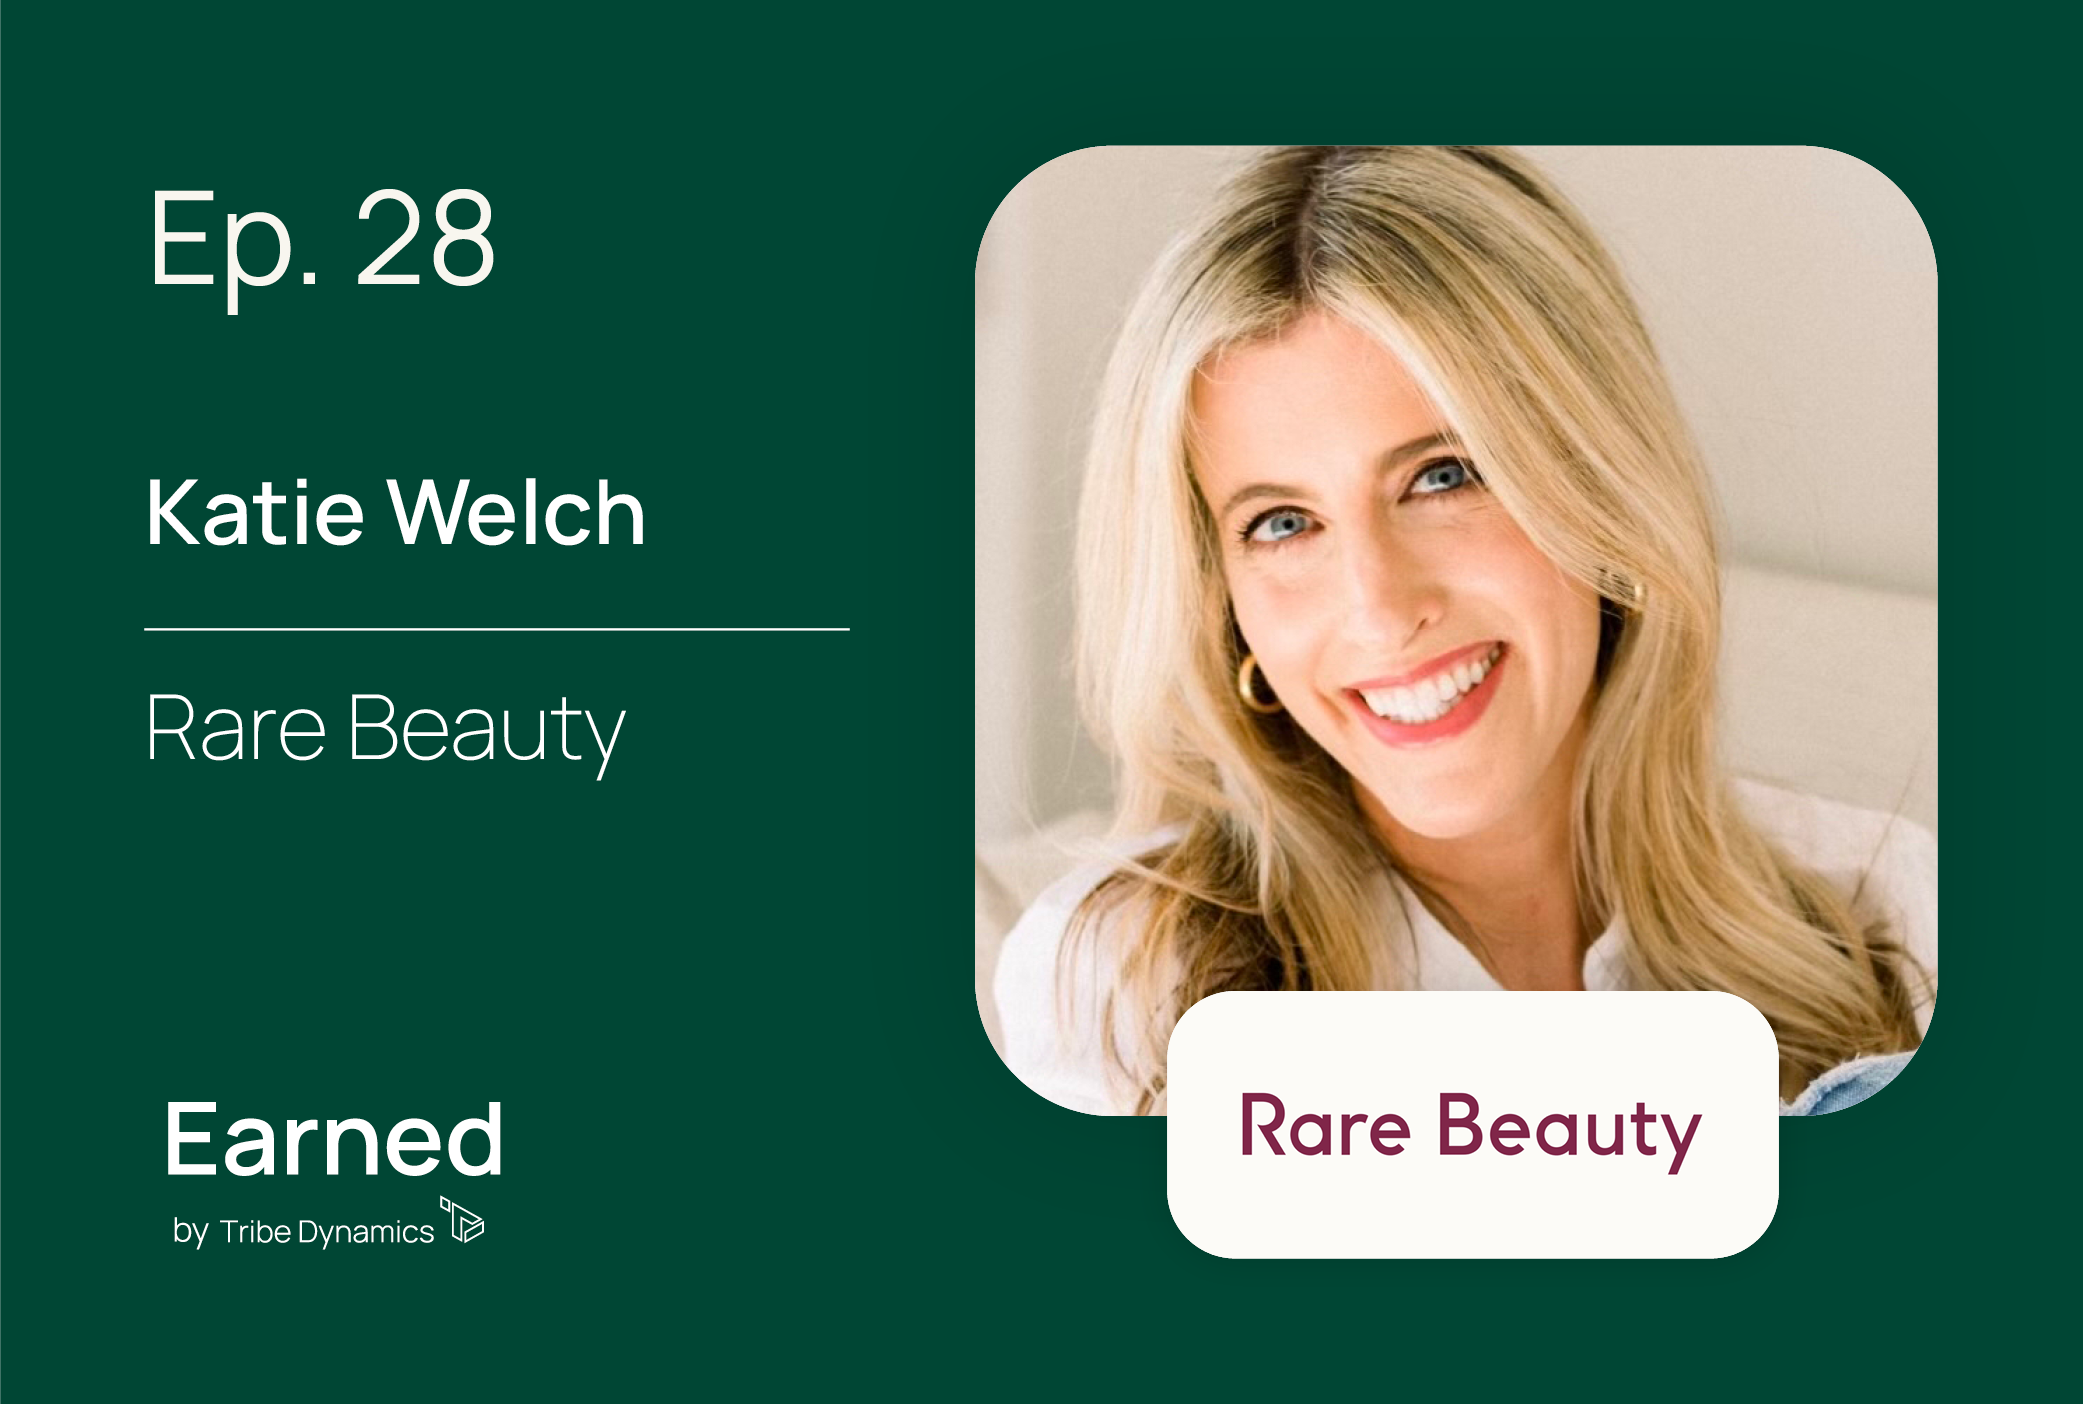 Earned Ep. 28: Rare Beauty CMO Katie Welch on Launching Selena Gomez’s Inclusive Beauty Brand in the Middle of a Pandemic